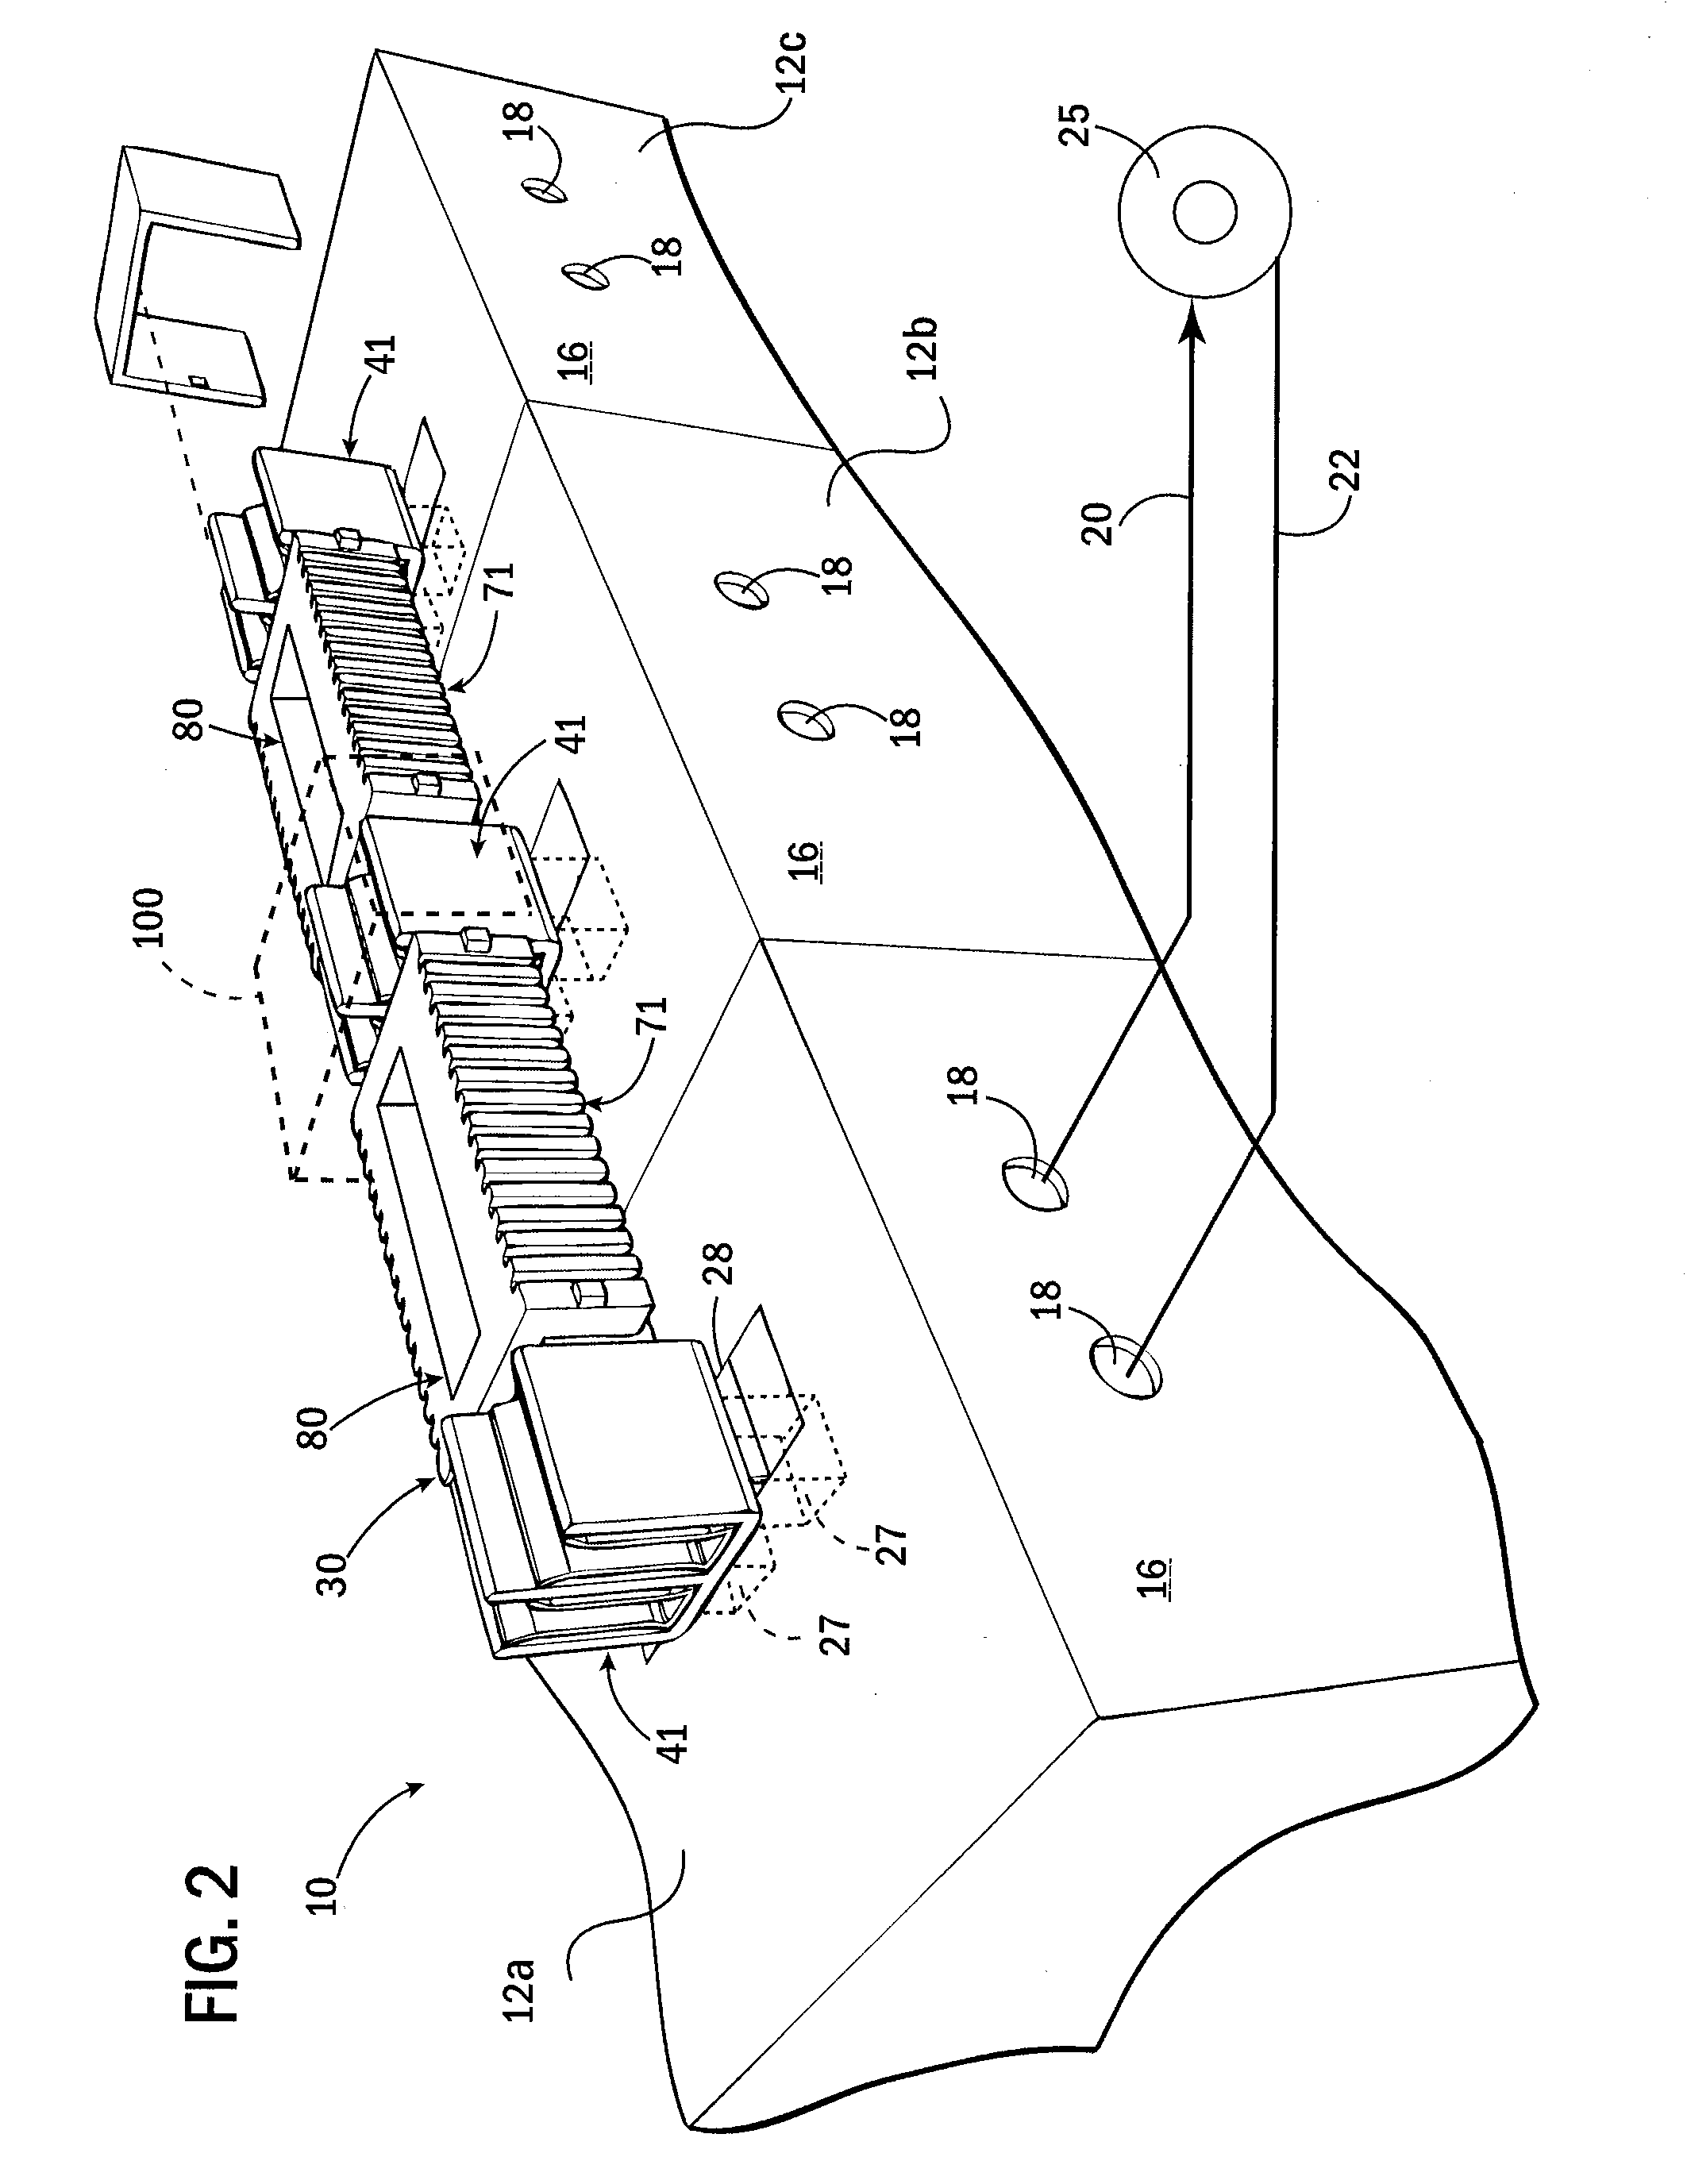 System for Connecting Motor Drives